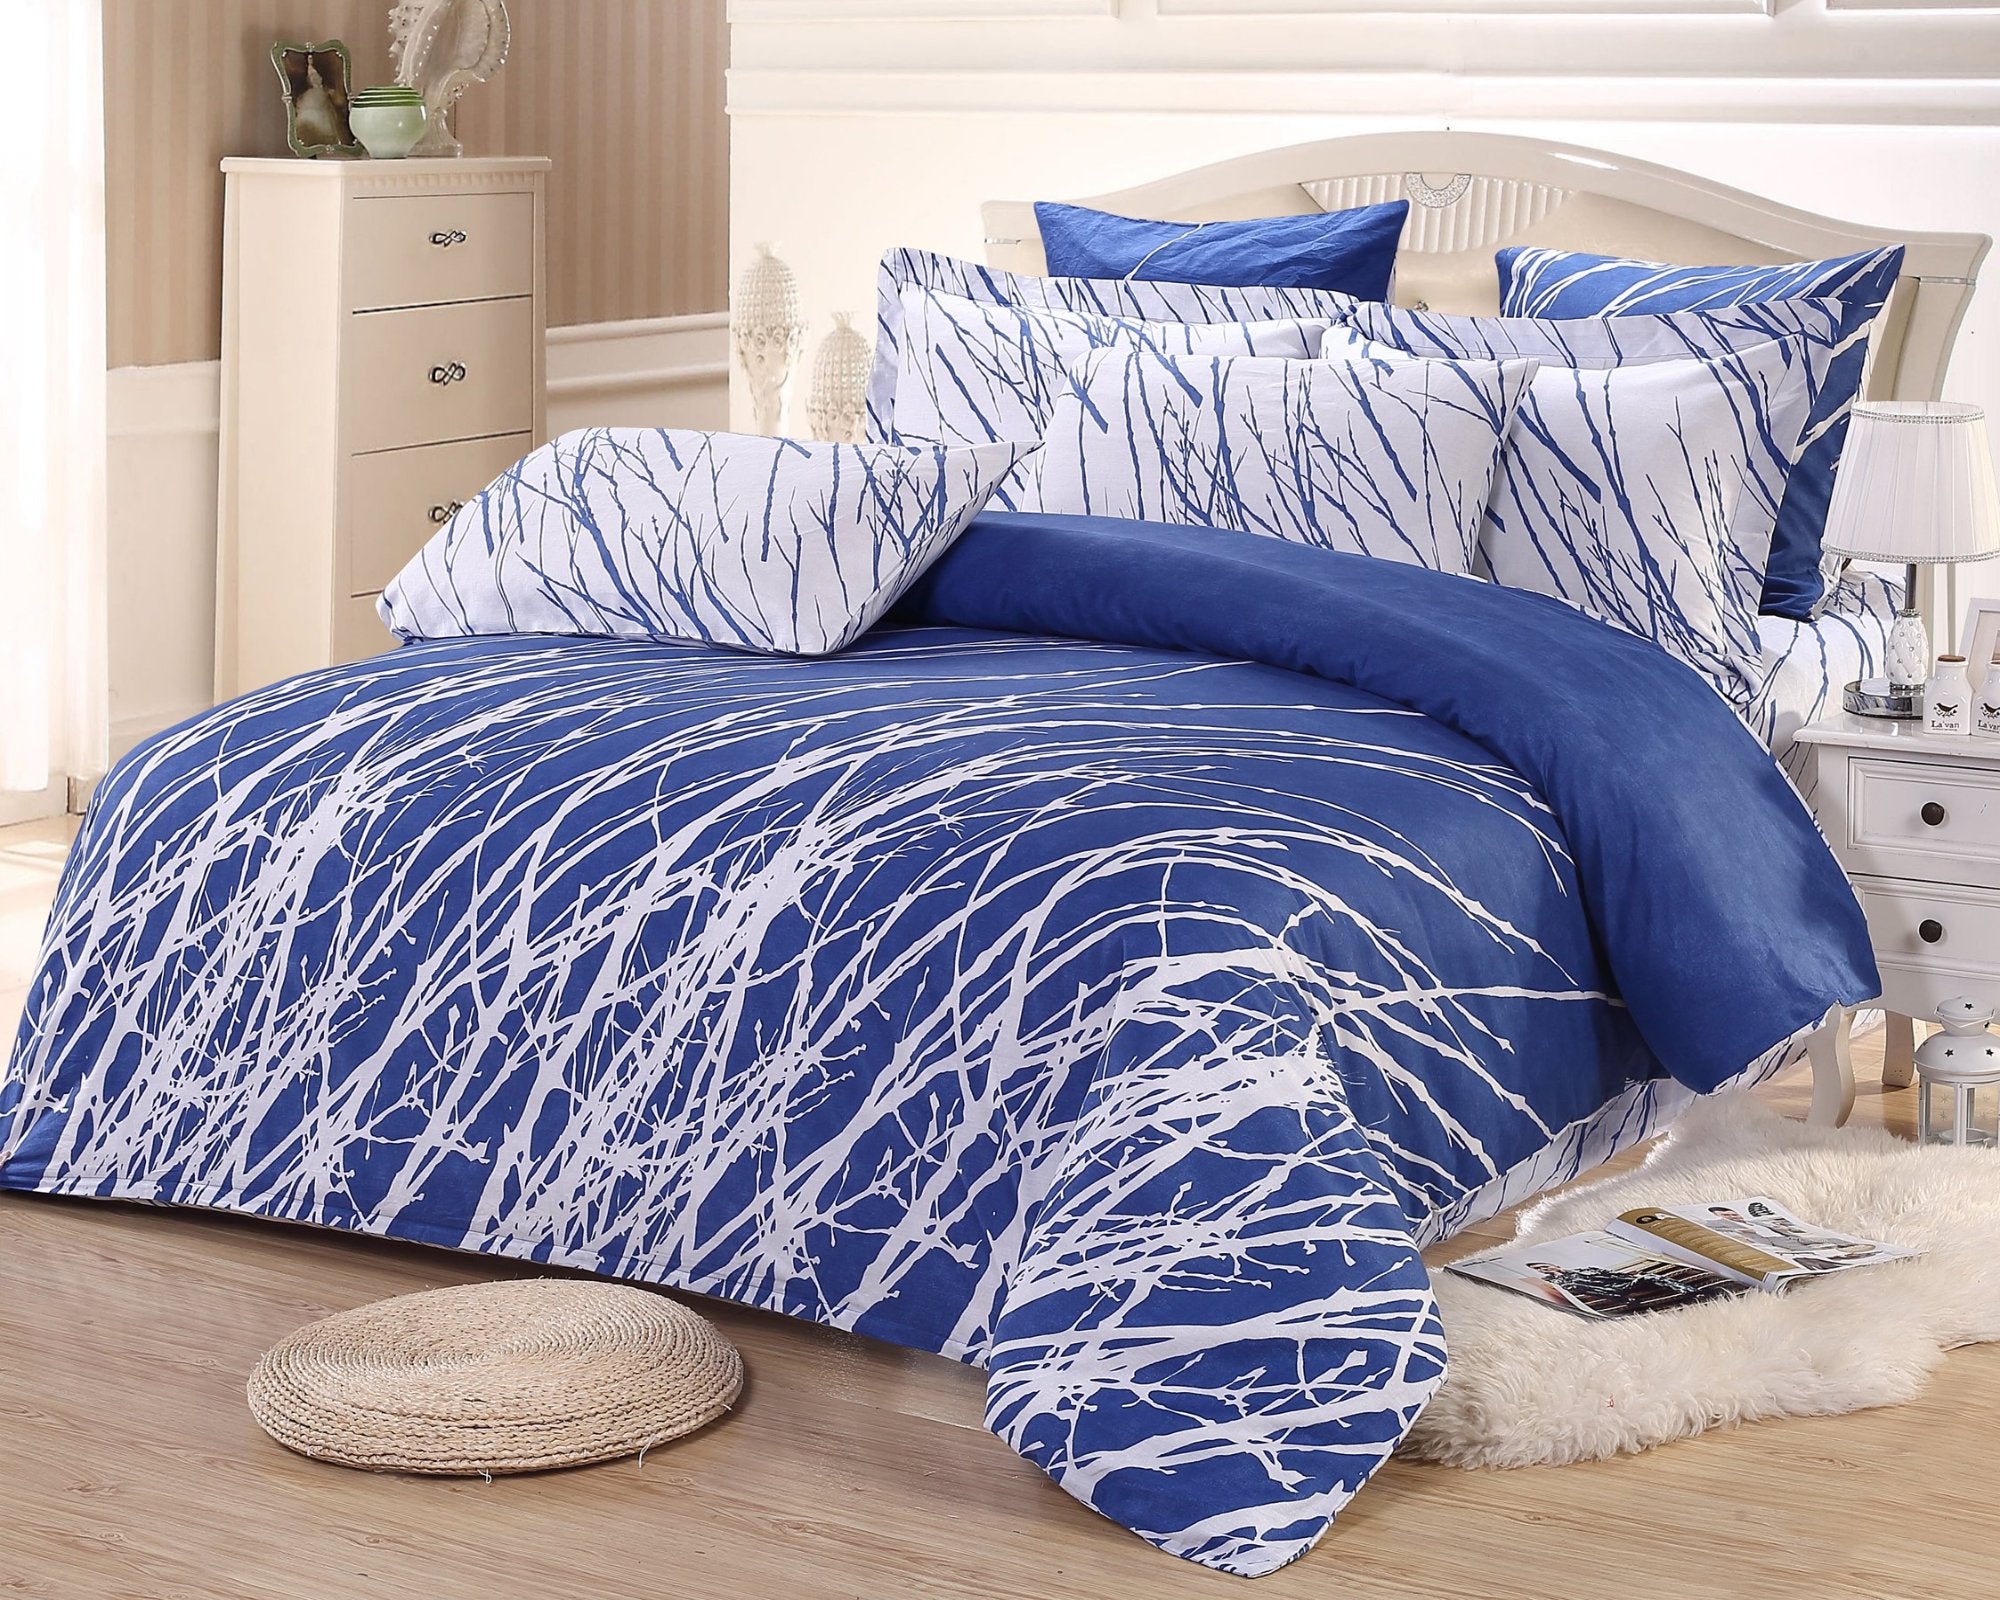 Tree Branches 100% Cotton 5 Piece Bedding Set: Duvet Cover, Pillowcases and Pillow Shams